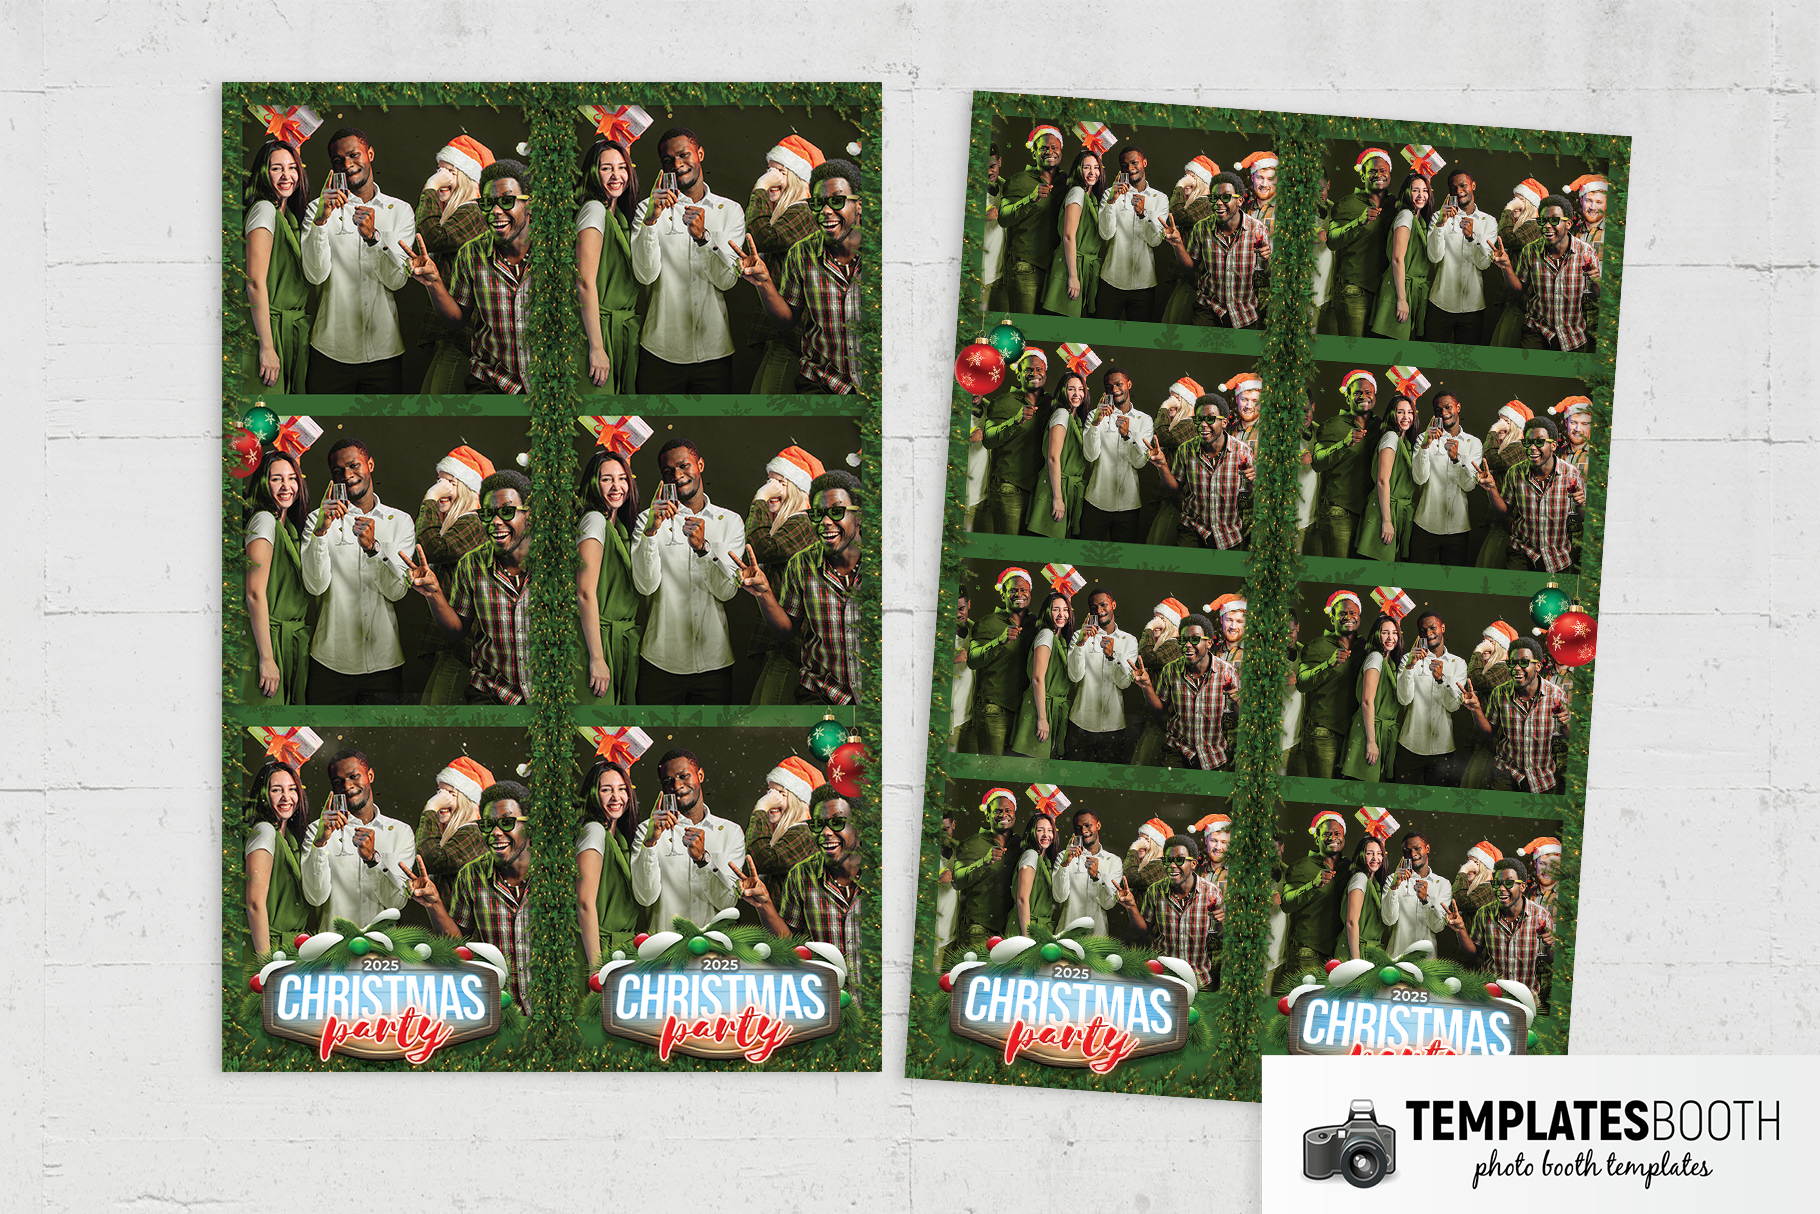 Green Christmas Photo Booth Template